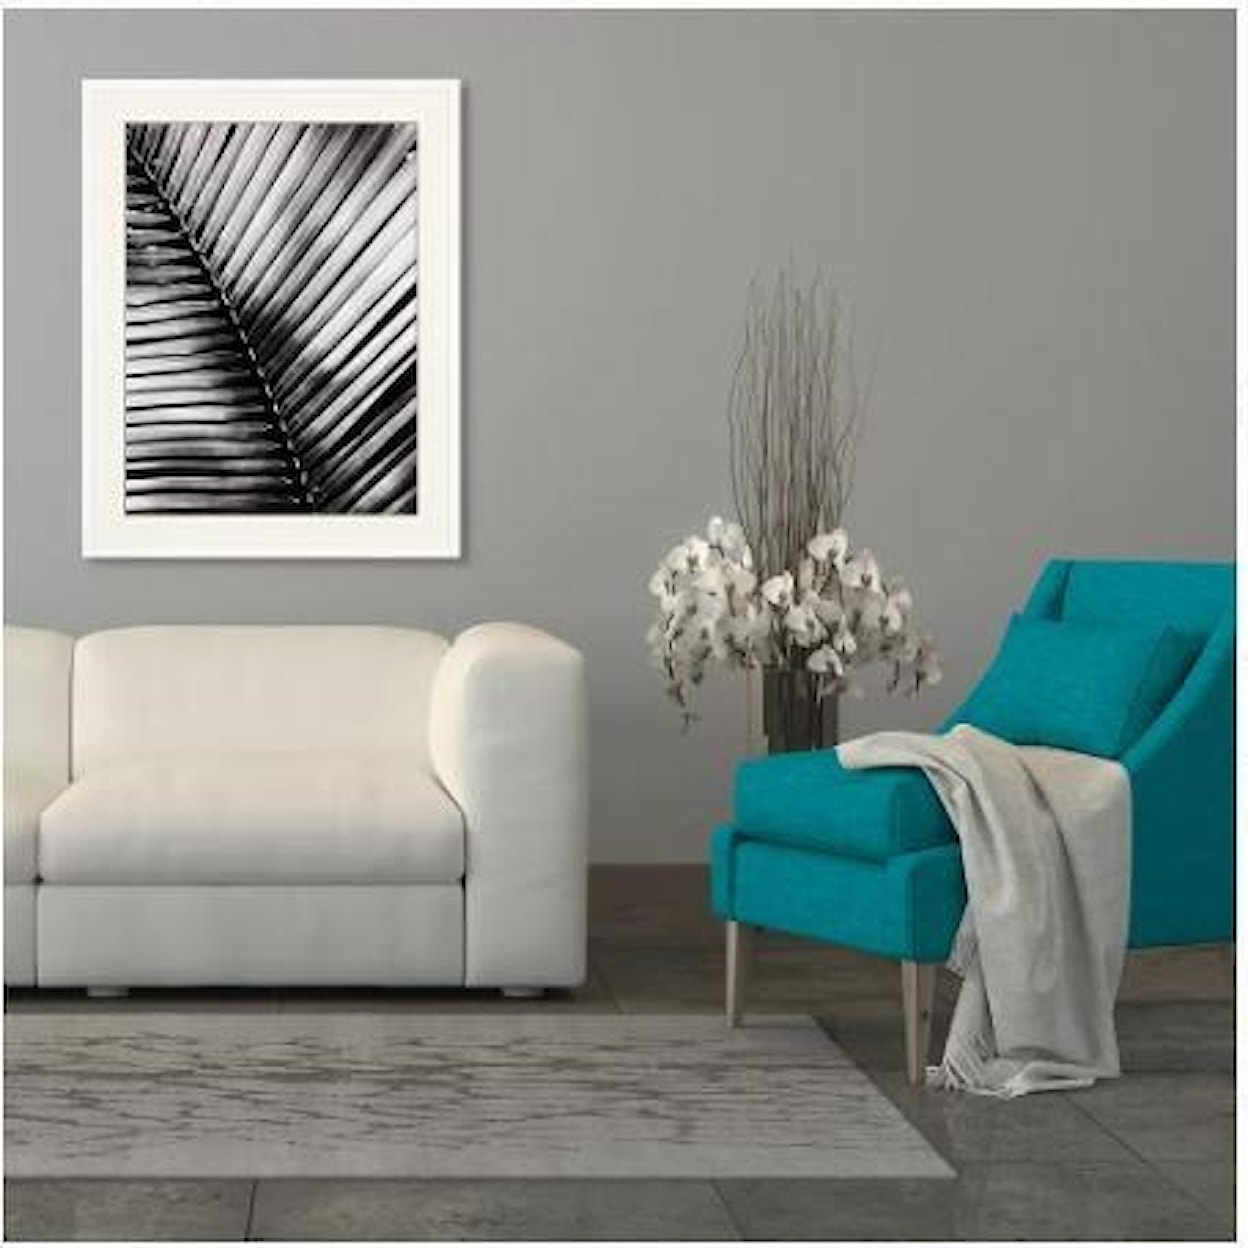 Paragon Wall Art Palm Frond I